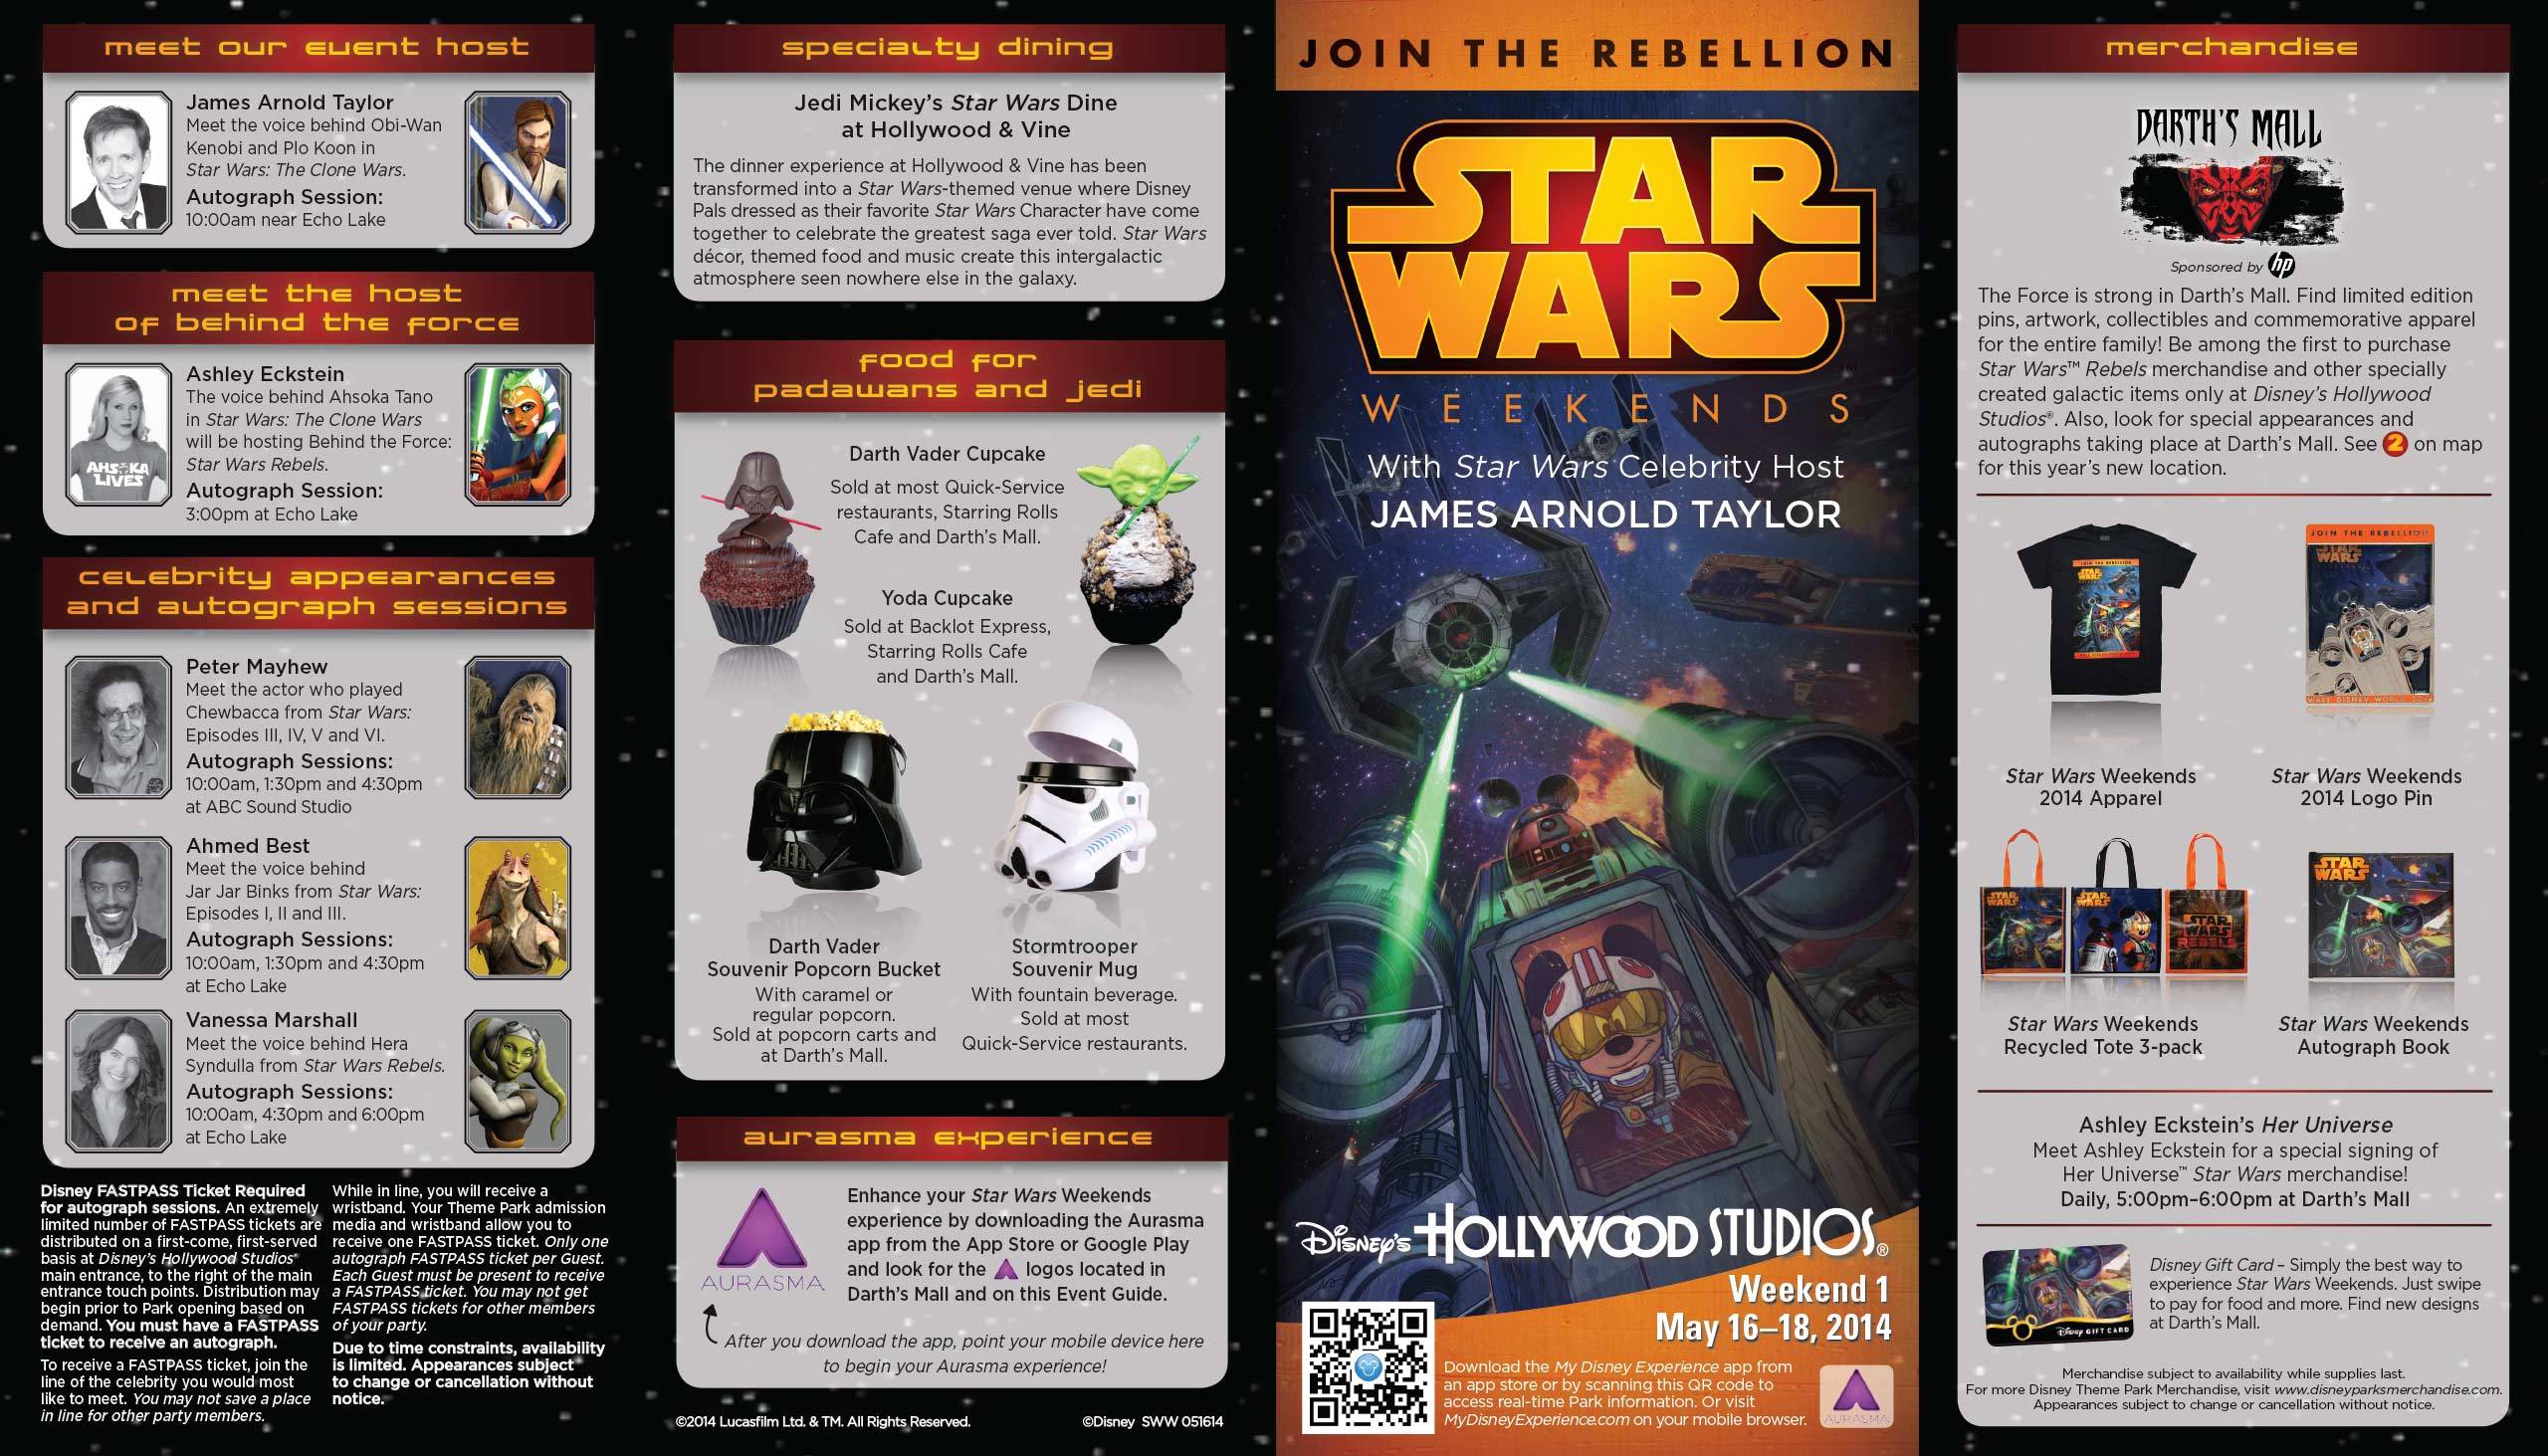 PHOTOS - 2014 Star Wars Weekends guide map for Weekend 1